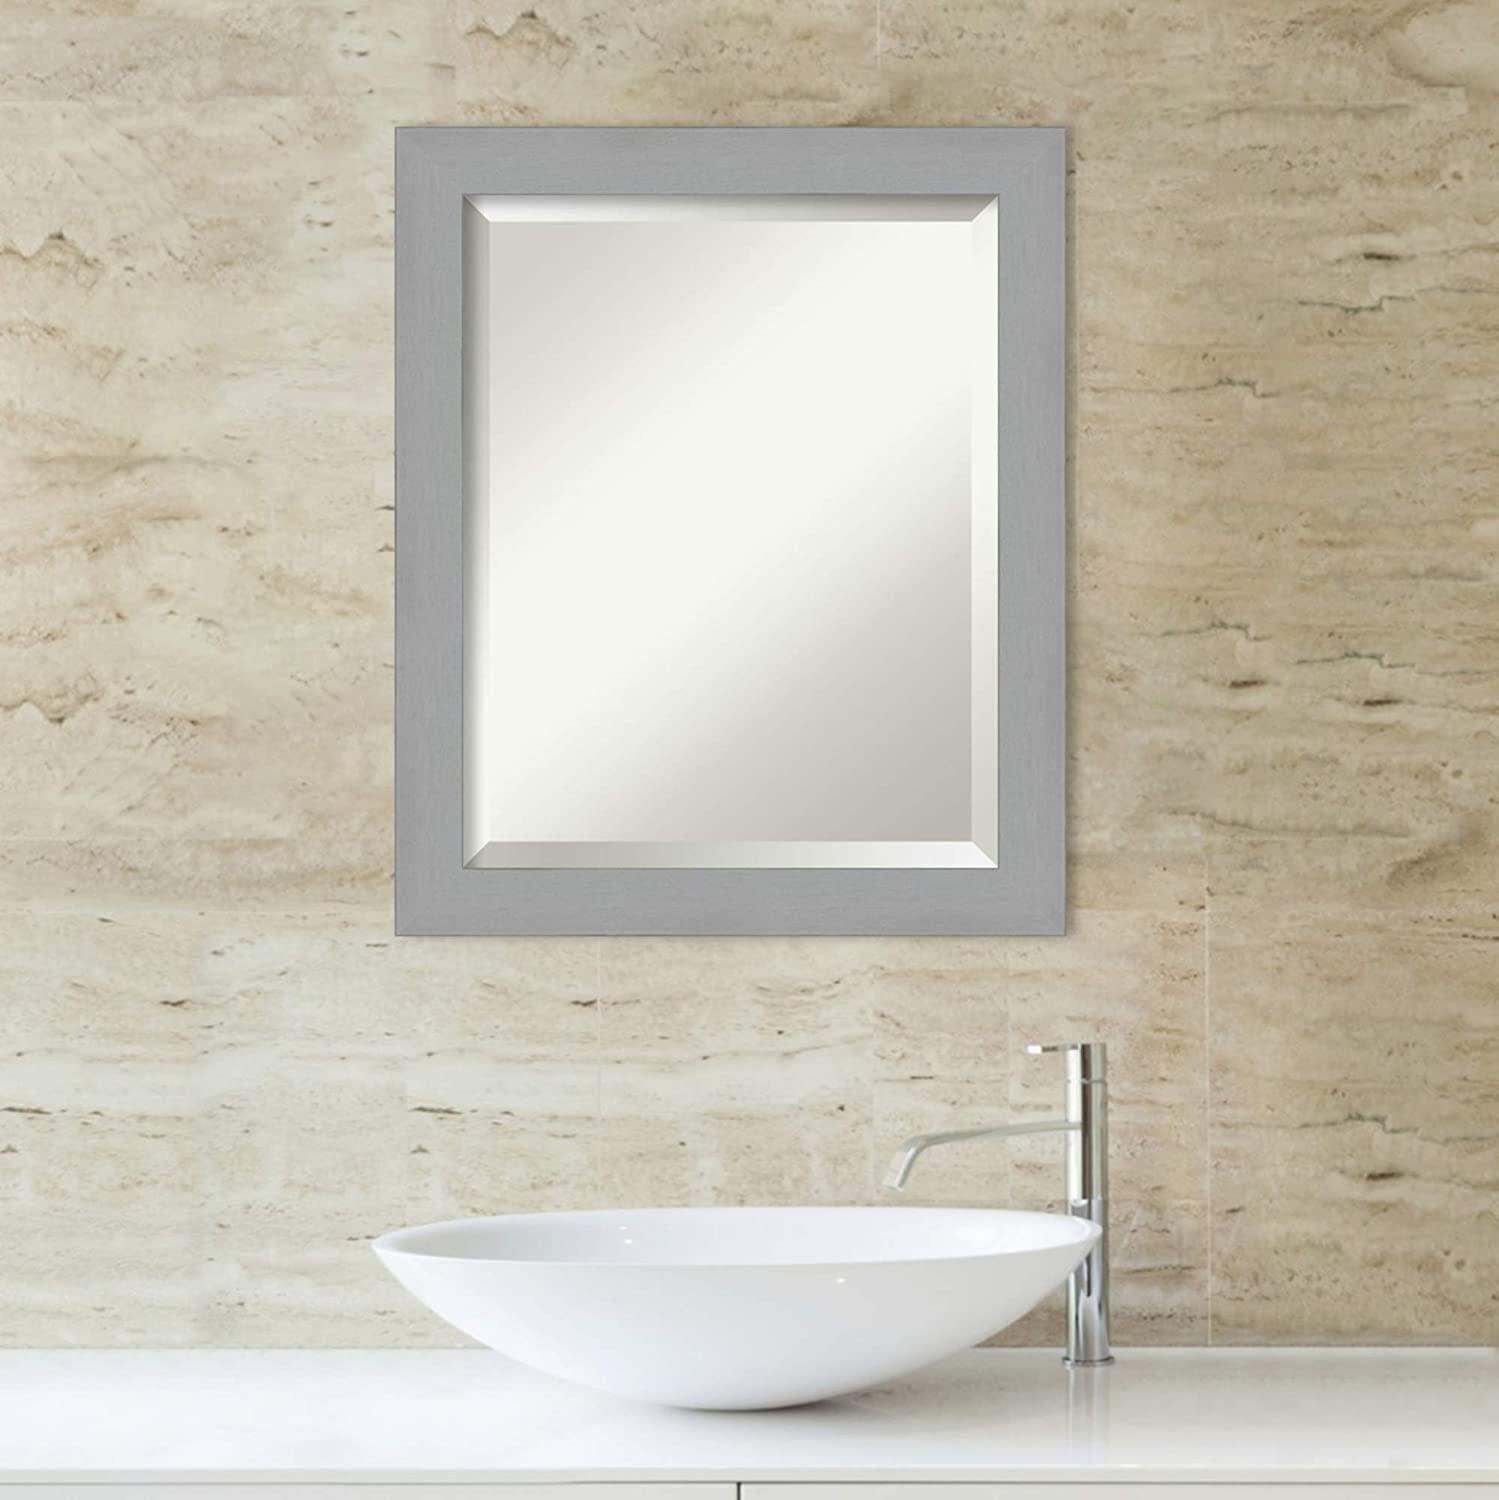 Framed Vanity Mirror Bathroom Mirrors for Wall Brushed Nickel Mirror Wall Mounted Mirror Small Mirror 23 38 x 19 38 in